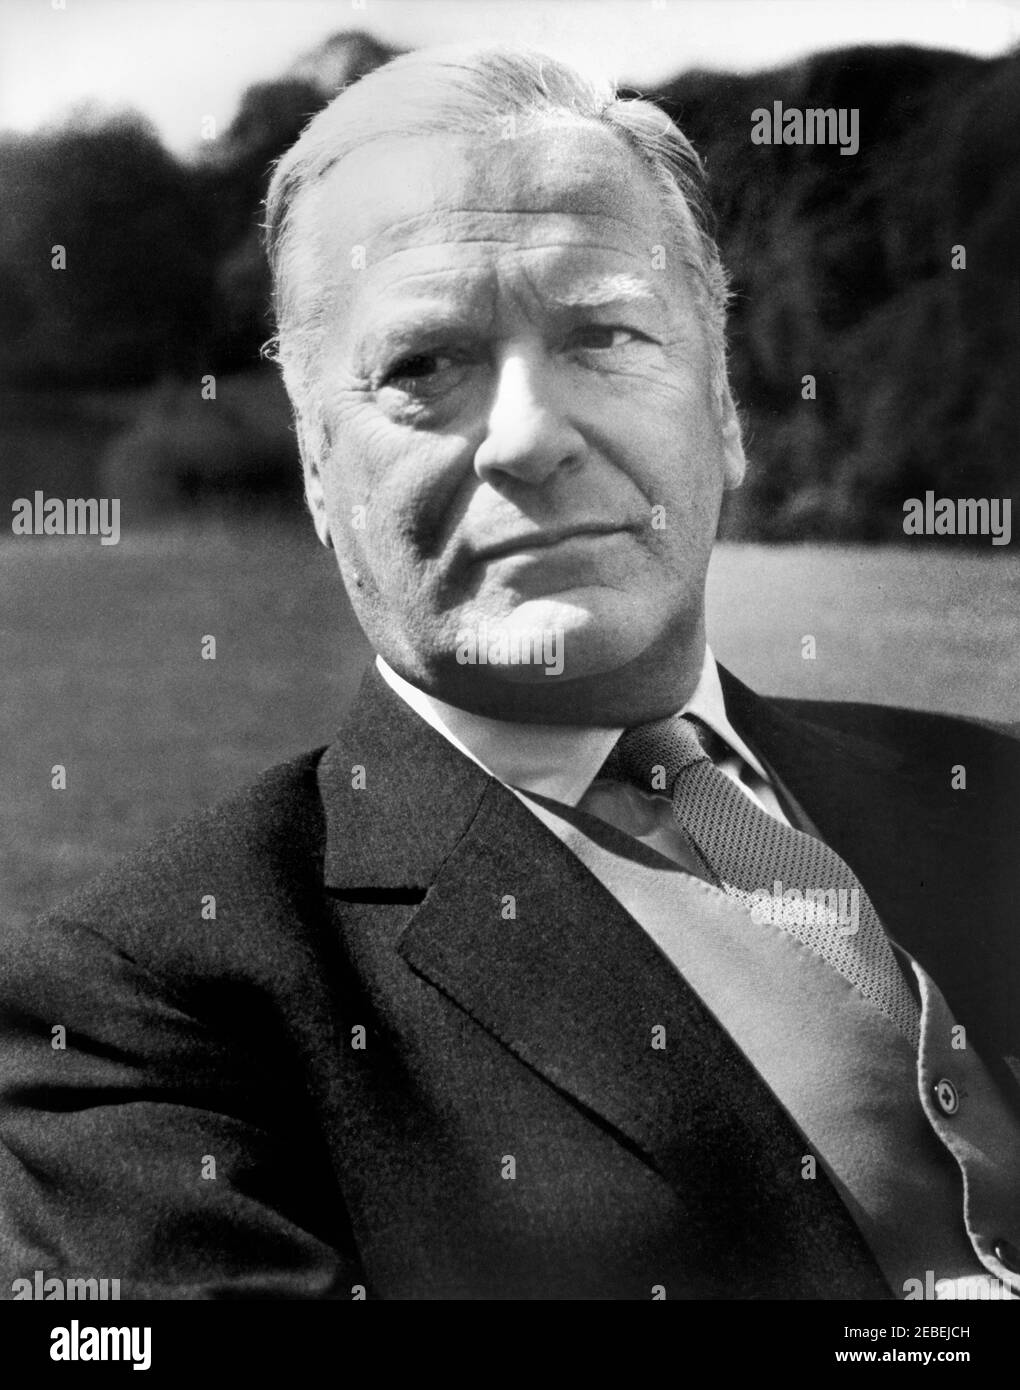 Curd Jurgens, Head and Shoulders Publicity Portrait for the Film, 'Battle of Britain', United Artists, 1969 Stockfoto